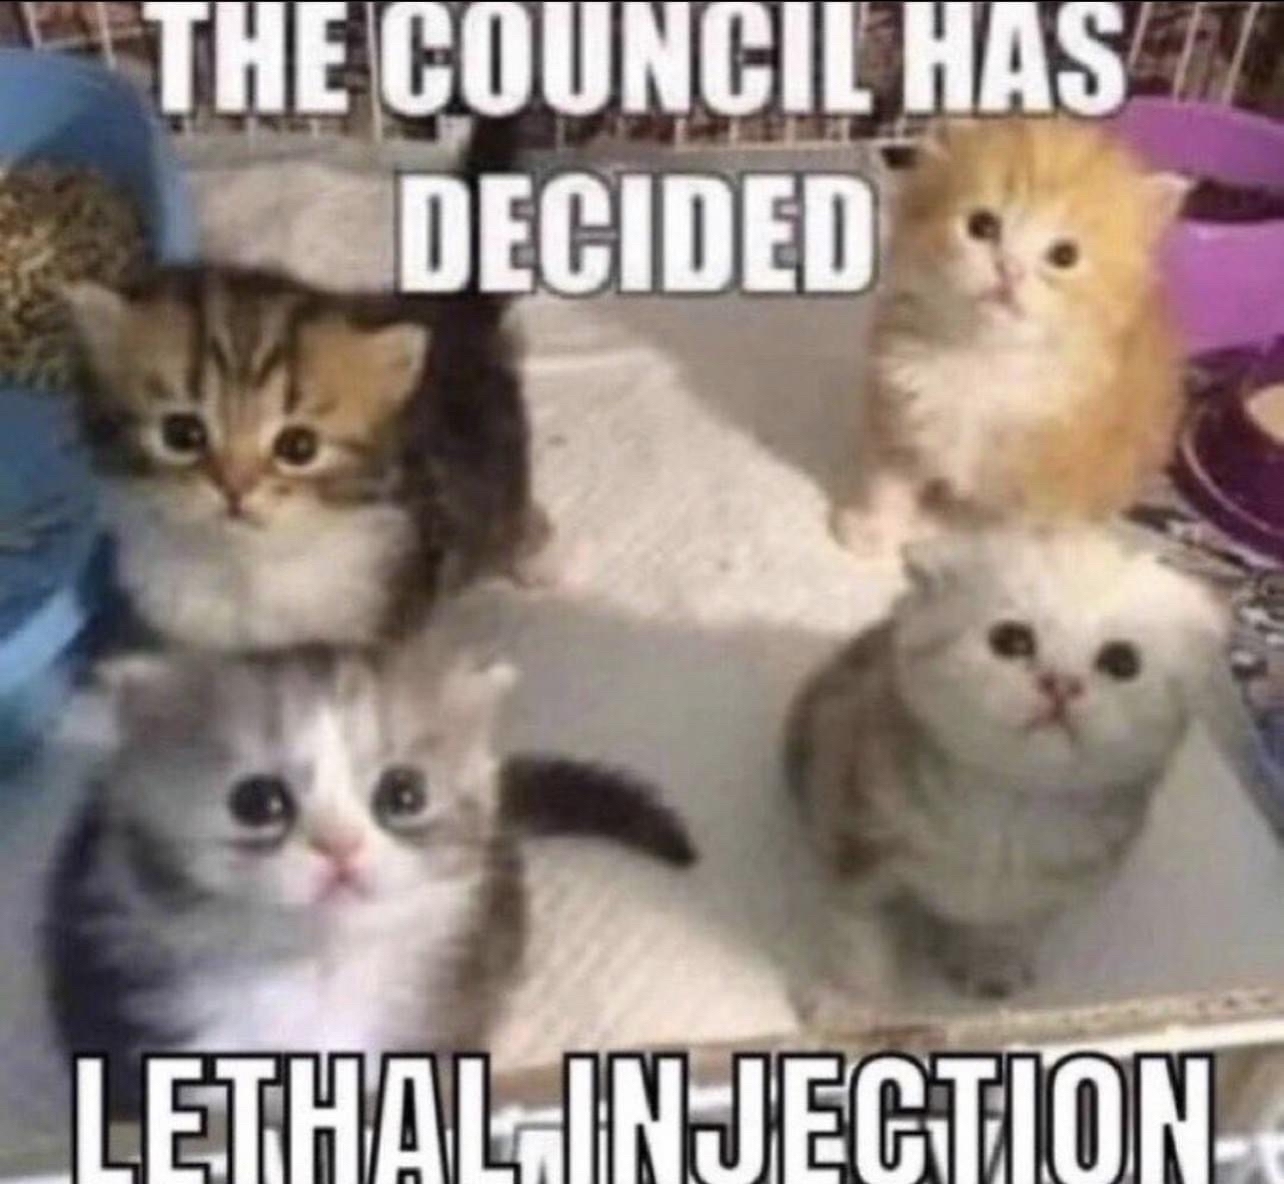 The council has decided lethal injection Blank Meme Template